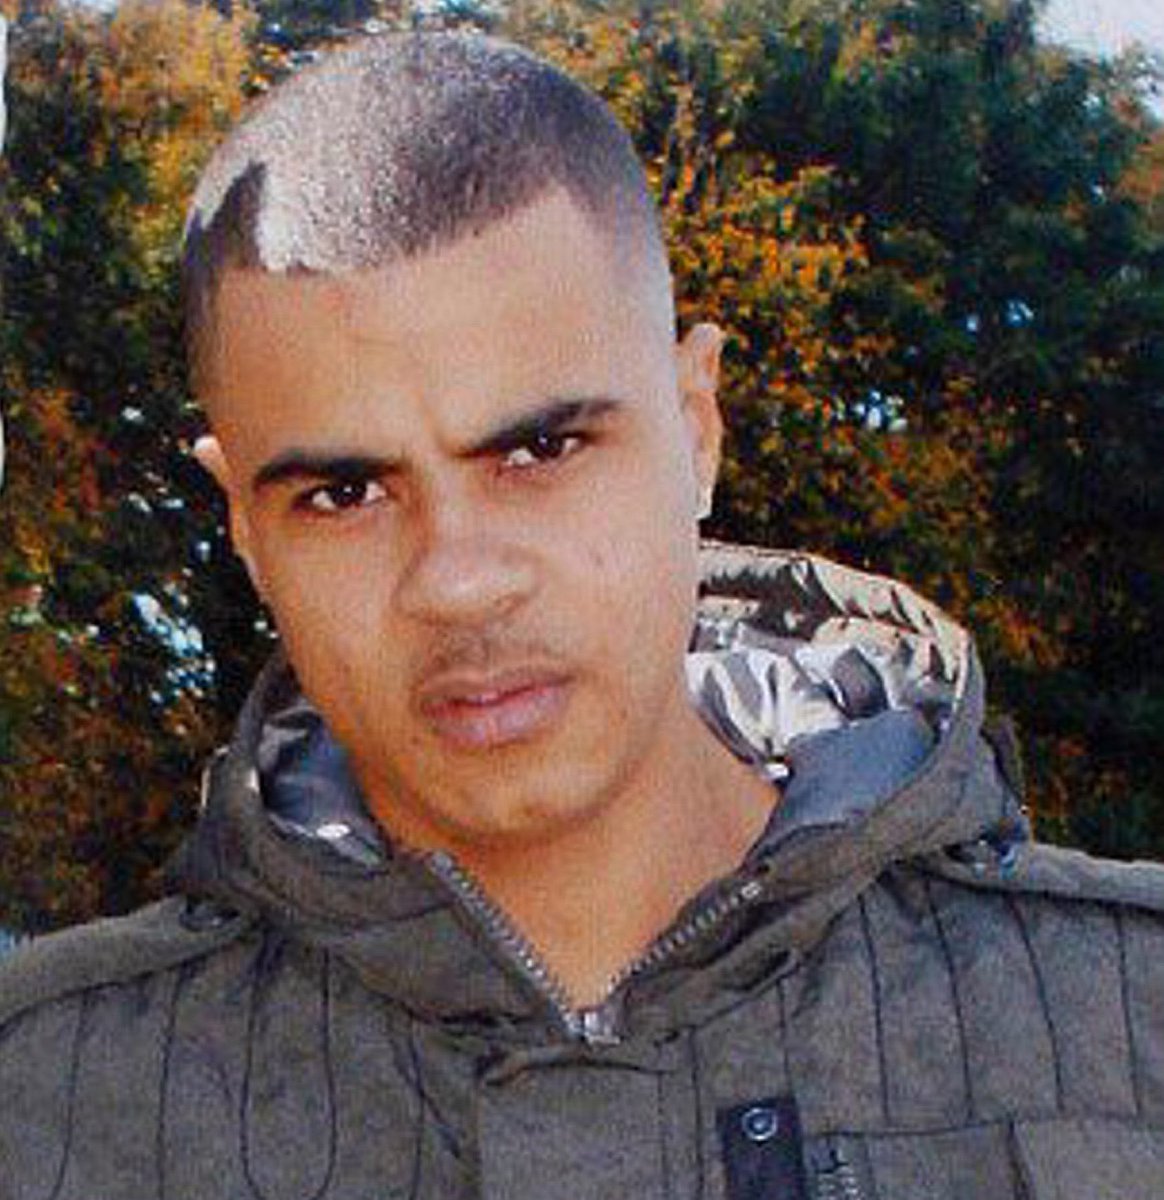 How Mark Duggan was portrayed by the media. The cropped image was use to show him as a thug and a criminal. He was holding a memorial of his late daughter.